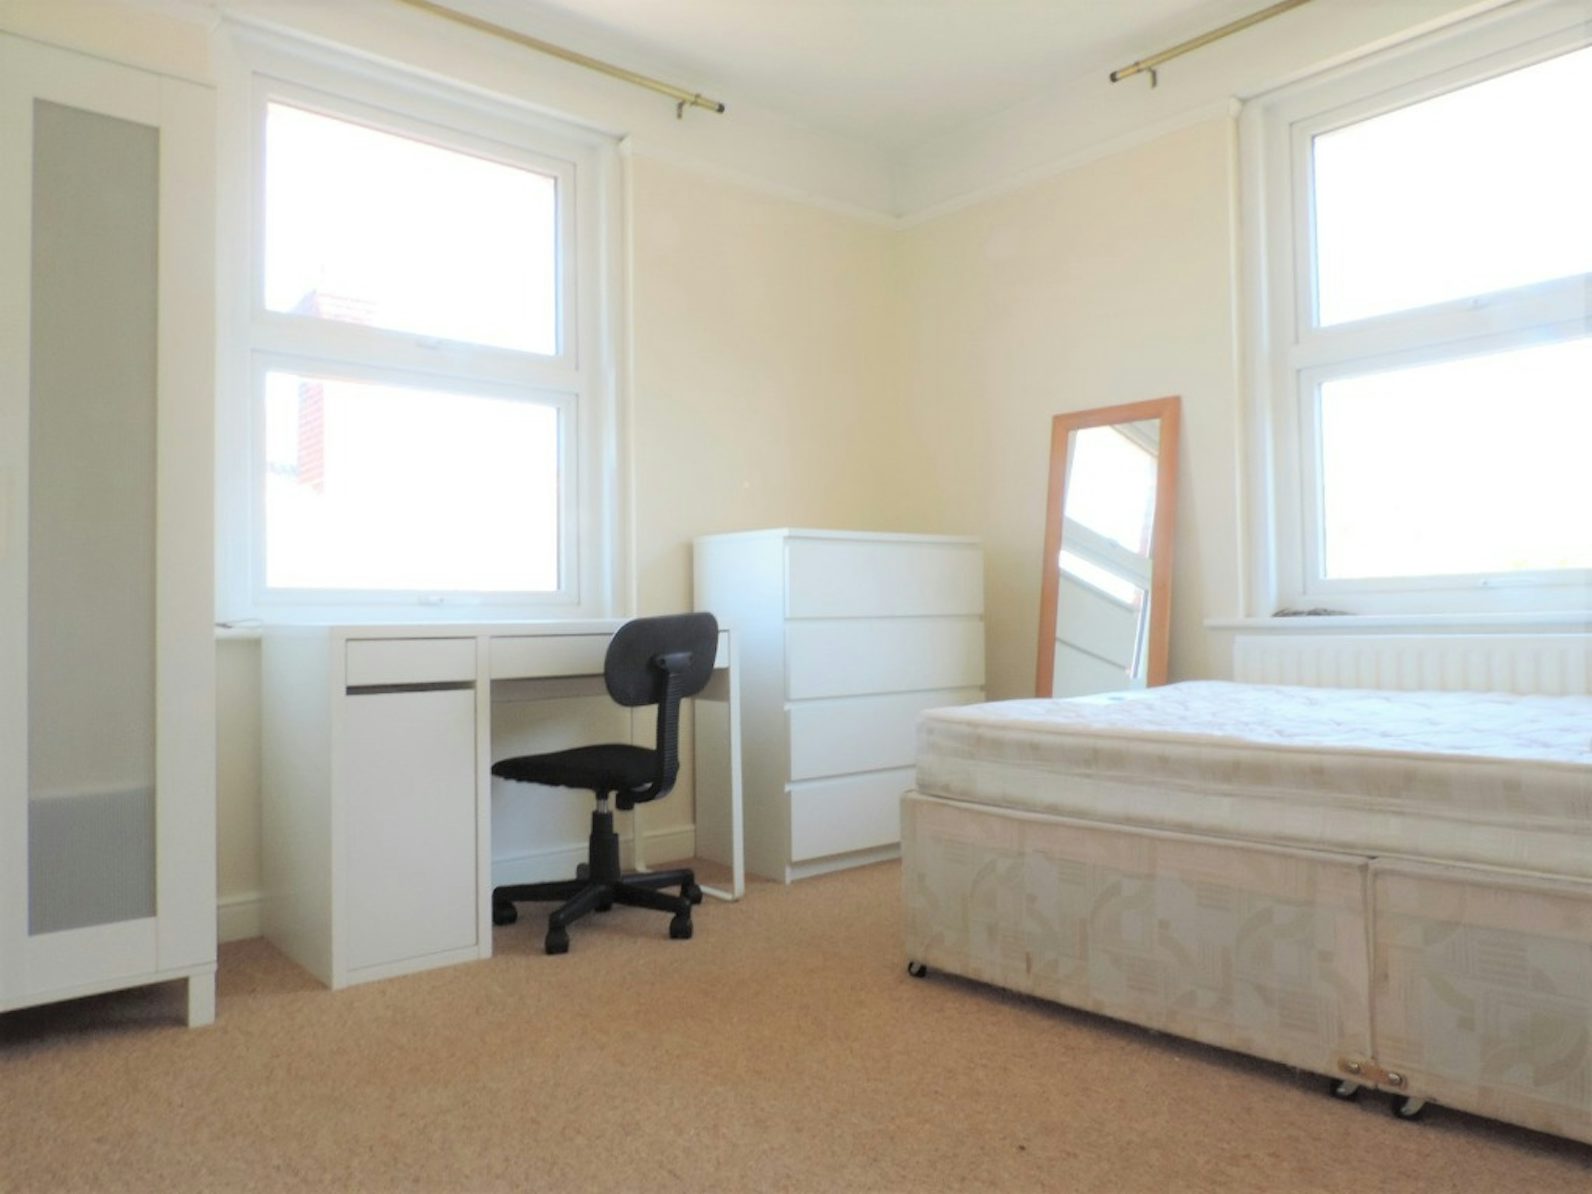 Maisonette to rent on Bray Rd Guildford, GU2